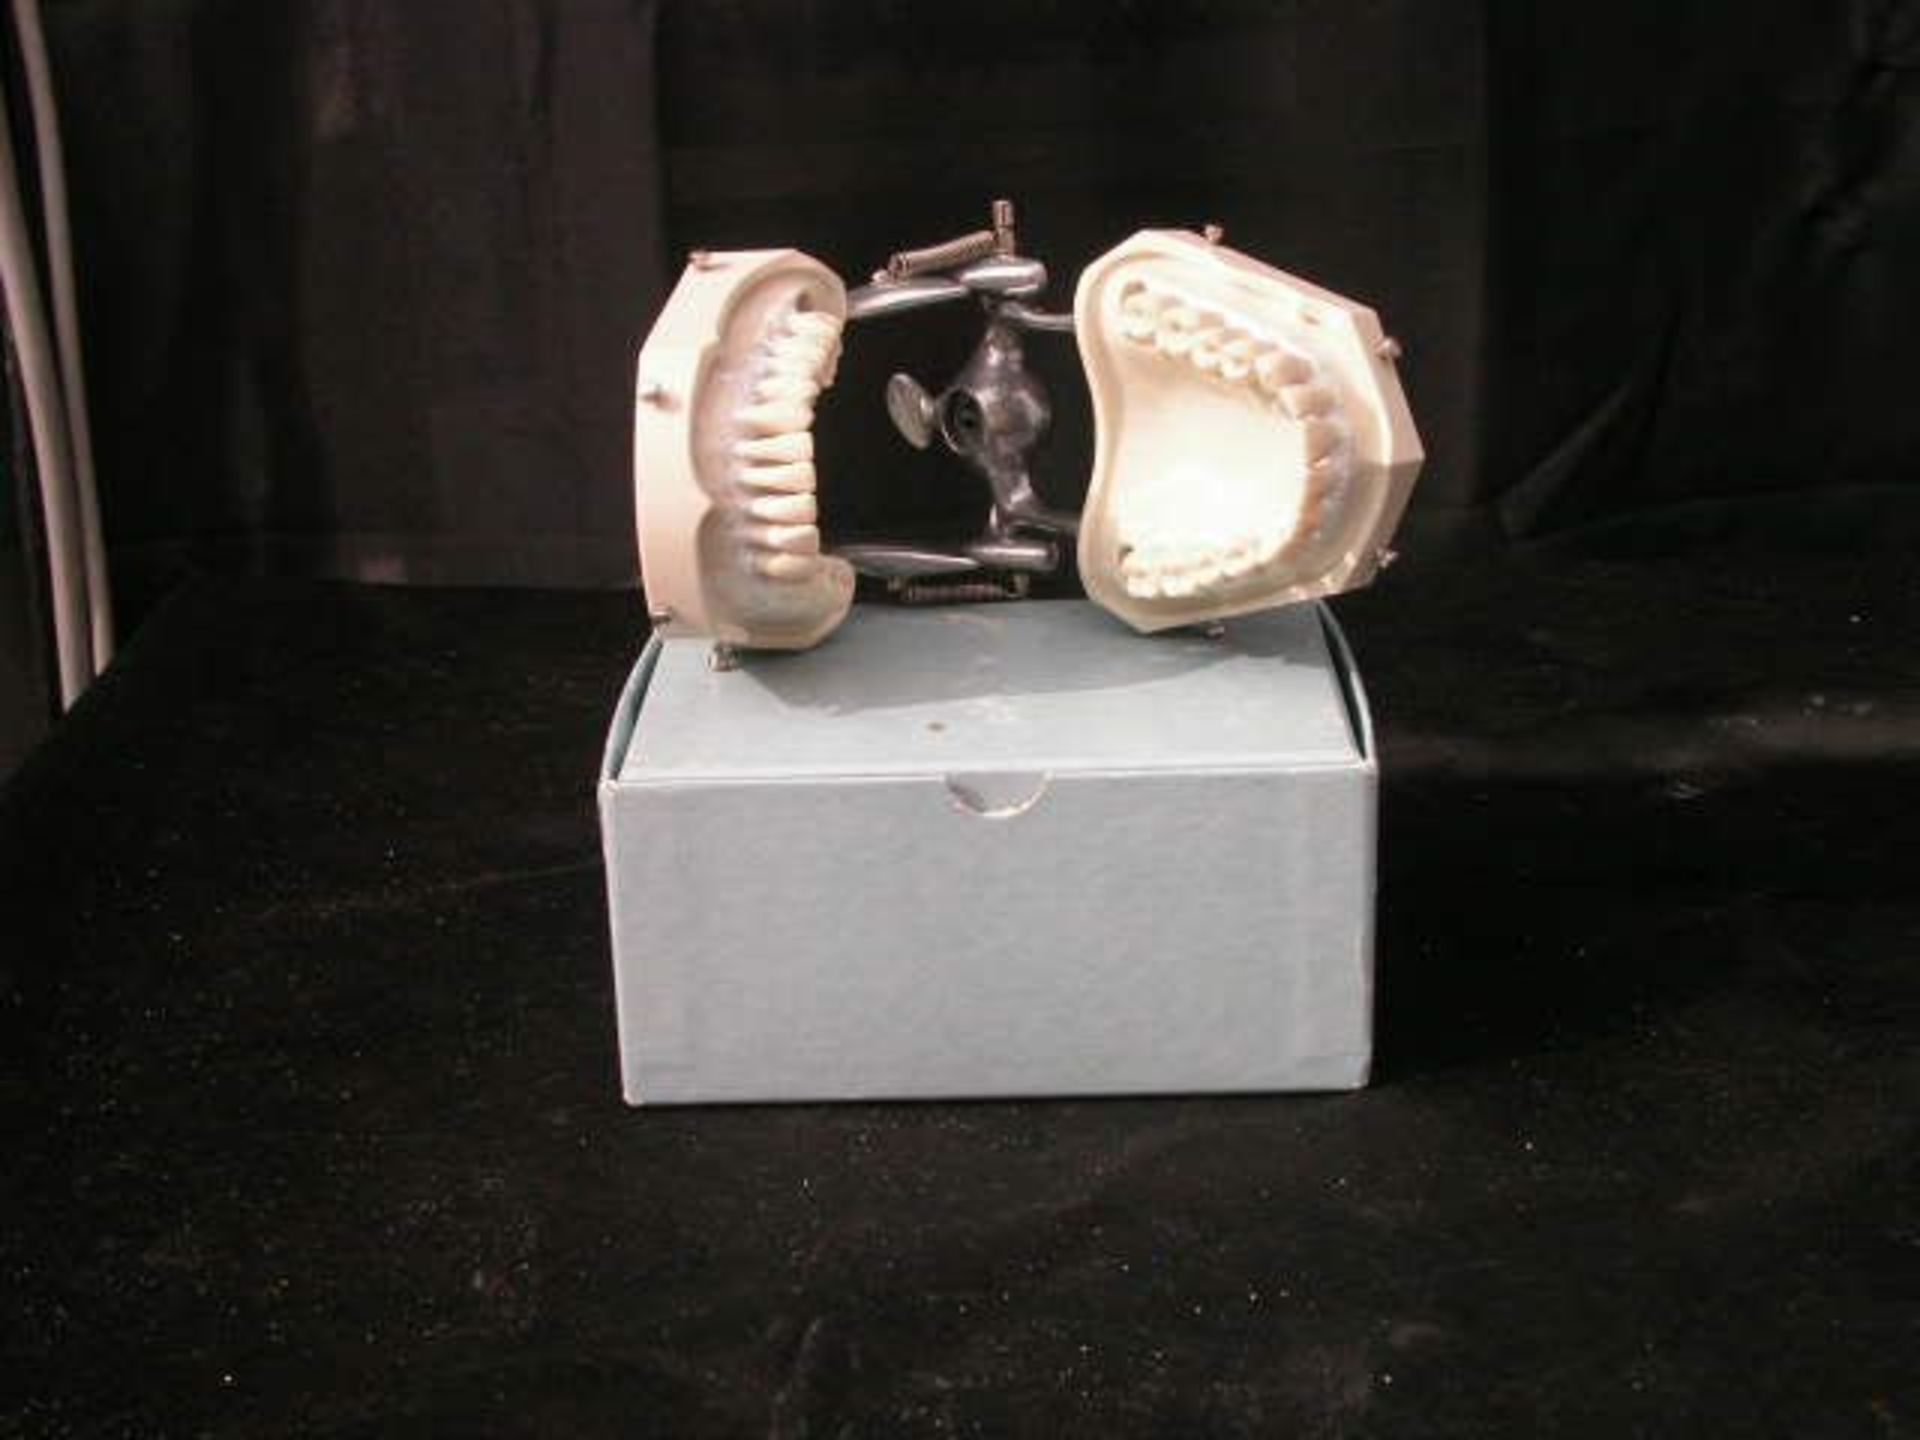 Columbia Dentiform Articulating Dental Model Removeable Teeth #2 4 Molars Gone, Qty 4, 330772226991 - Image 3 of 4